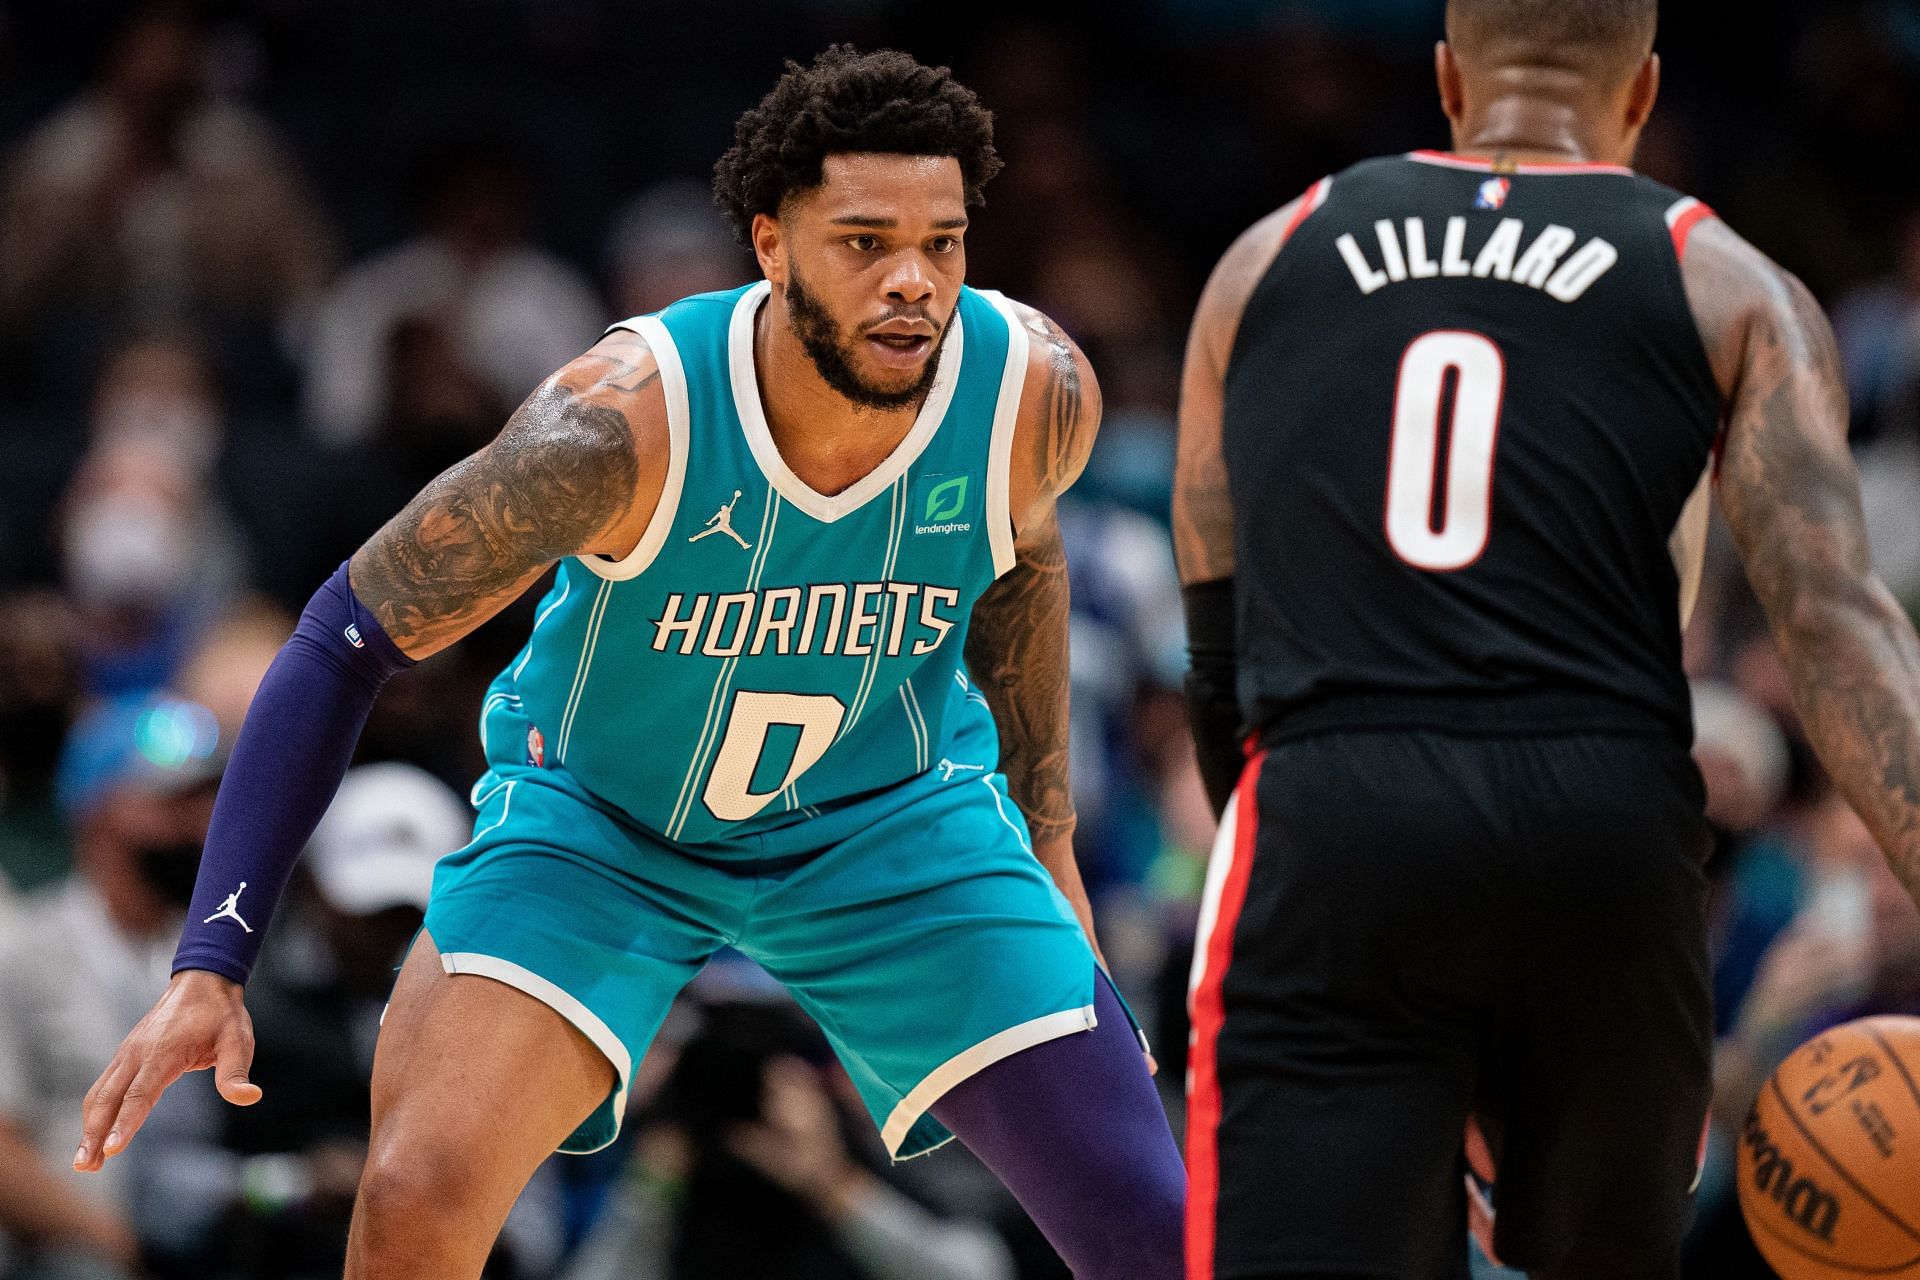 Miles Bridges #0 of the Charlotte Hornets guards Damian Lillard #0 of the Portland Trail Blazers during the fourth quarter during their game at Spectrum Center